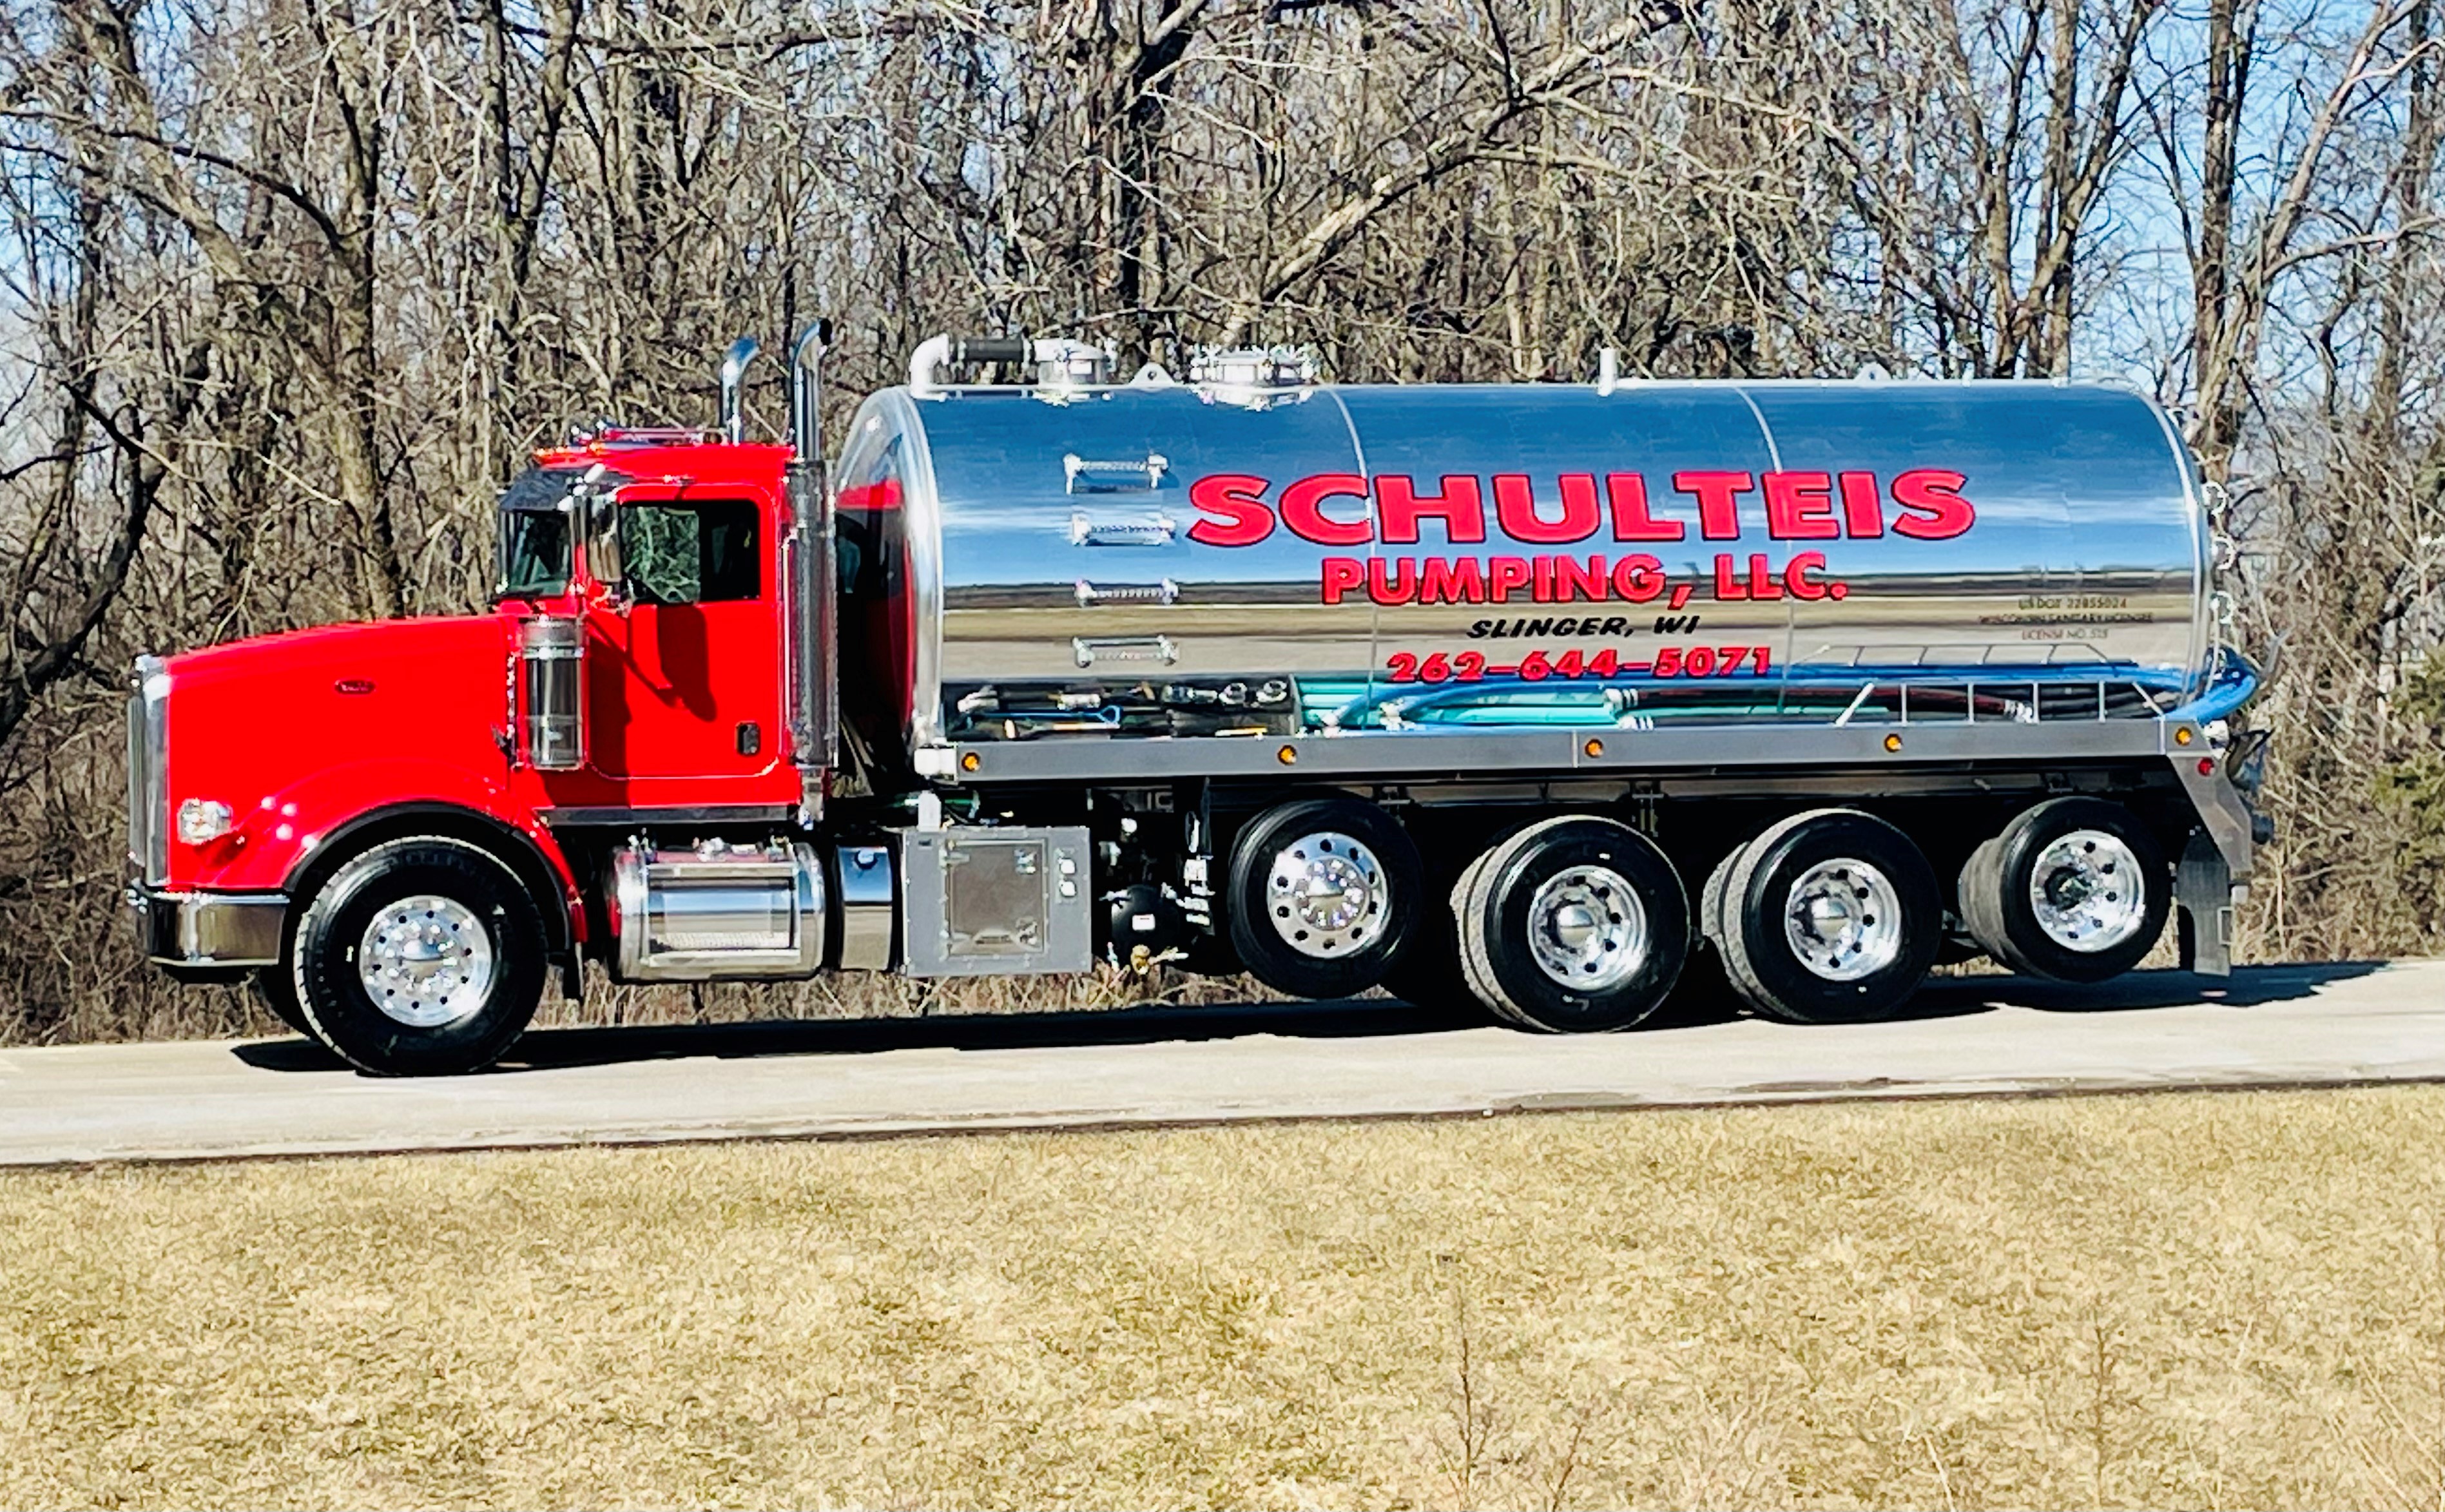 Photo of a Schulteis Pumping truck.